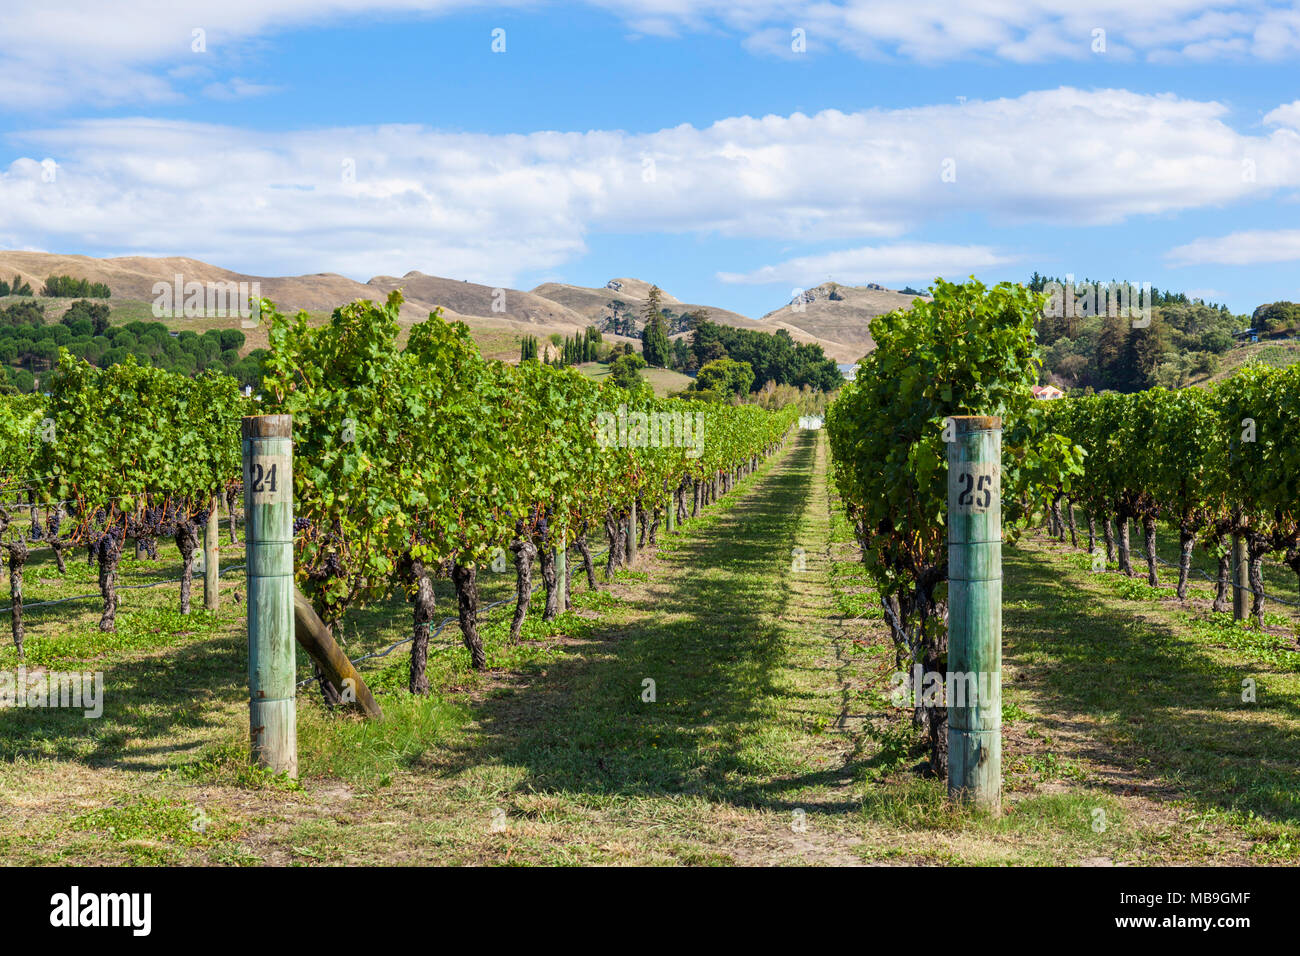 new zealand Hawkes bay new zealand bunches of grapes on vines in rows in a vineyard in Hawkes bay Napier New zealand North island NZ Stock Photo